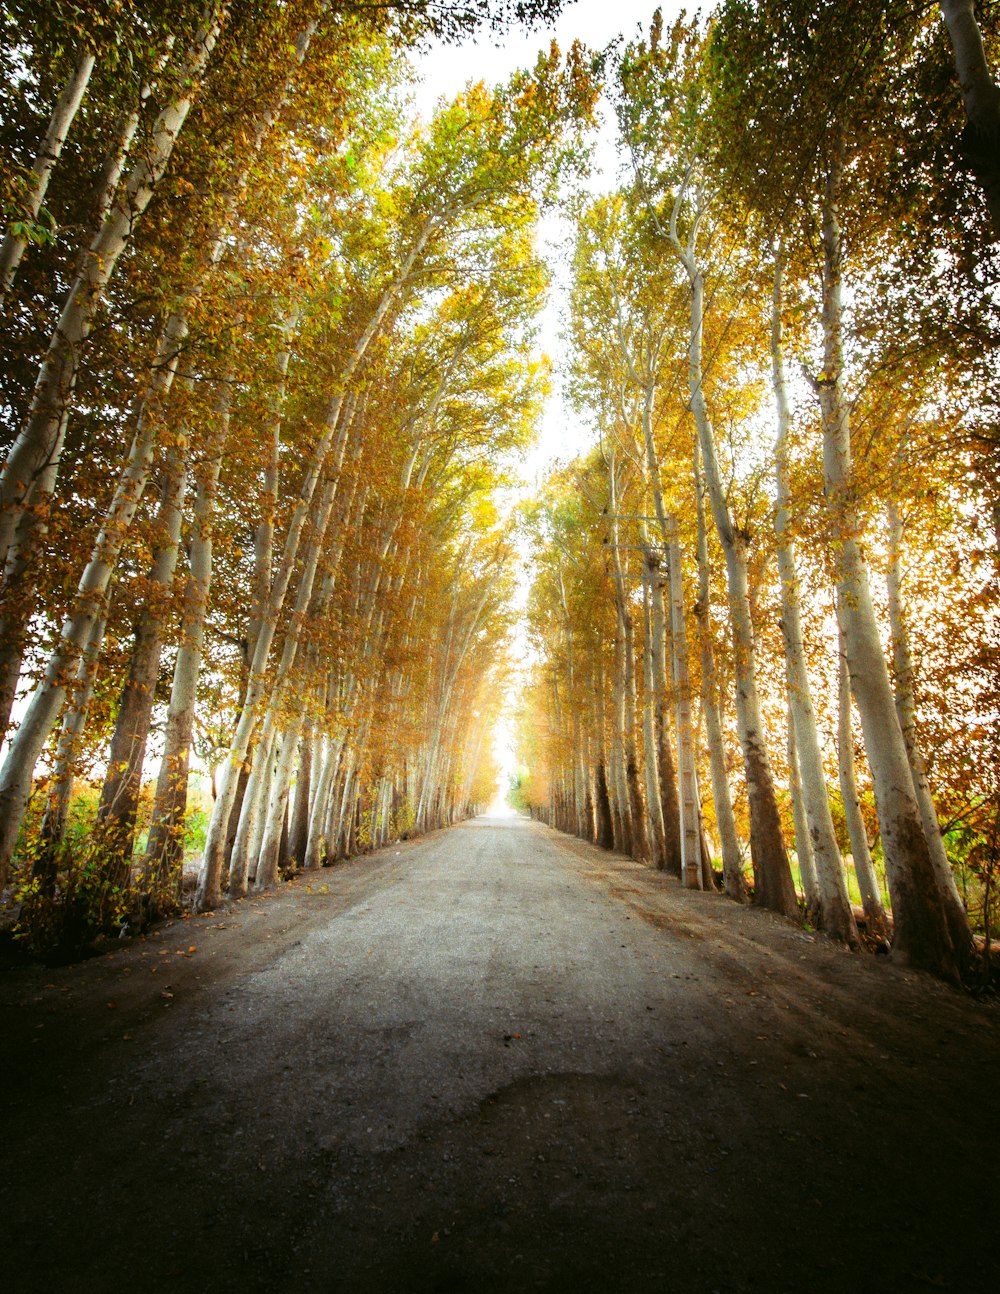 a dirt road surrounded by tall trees